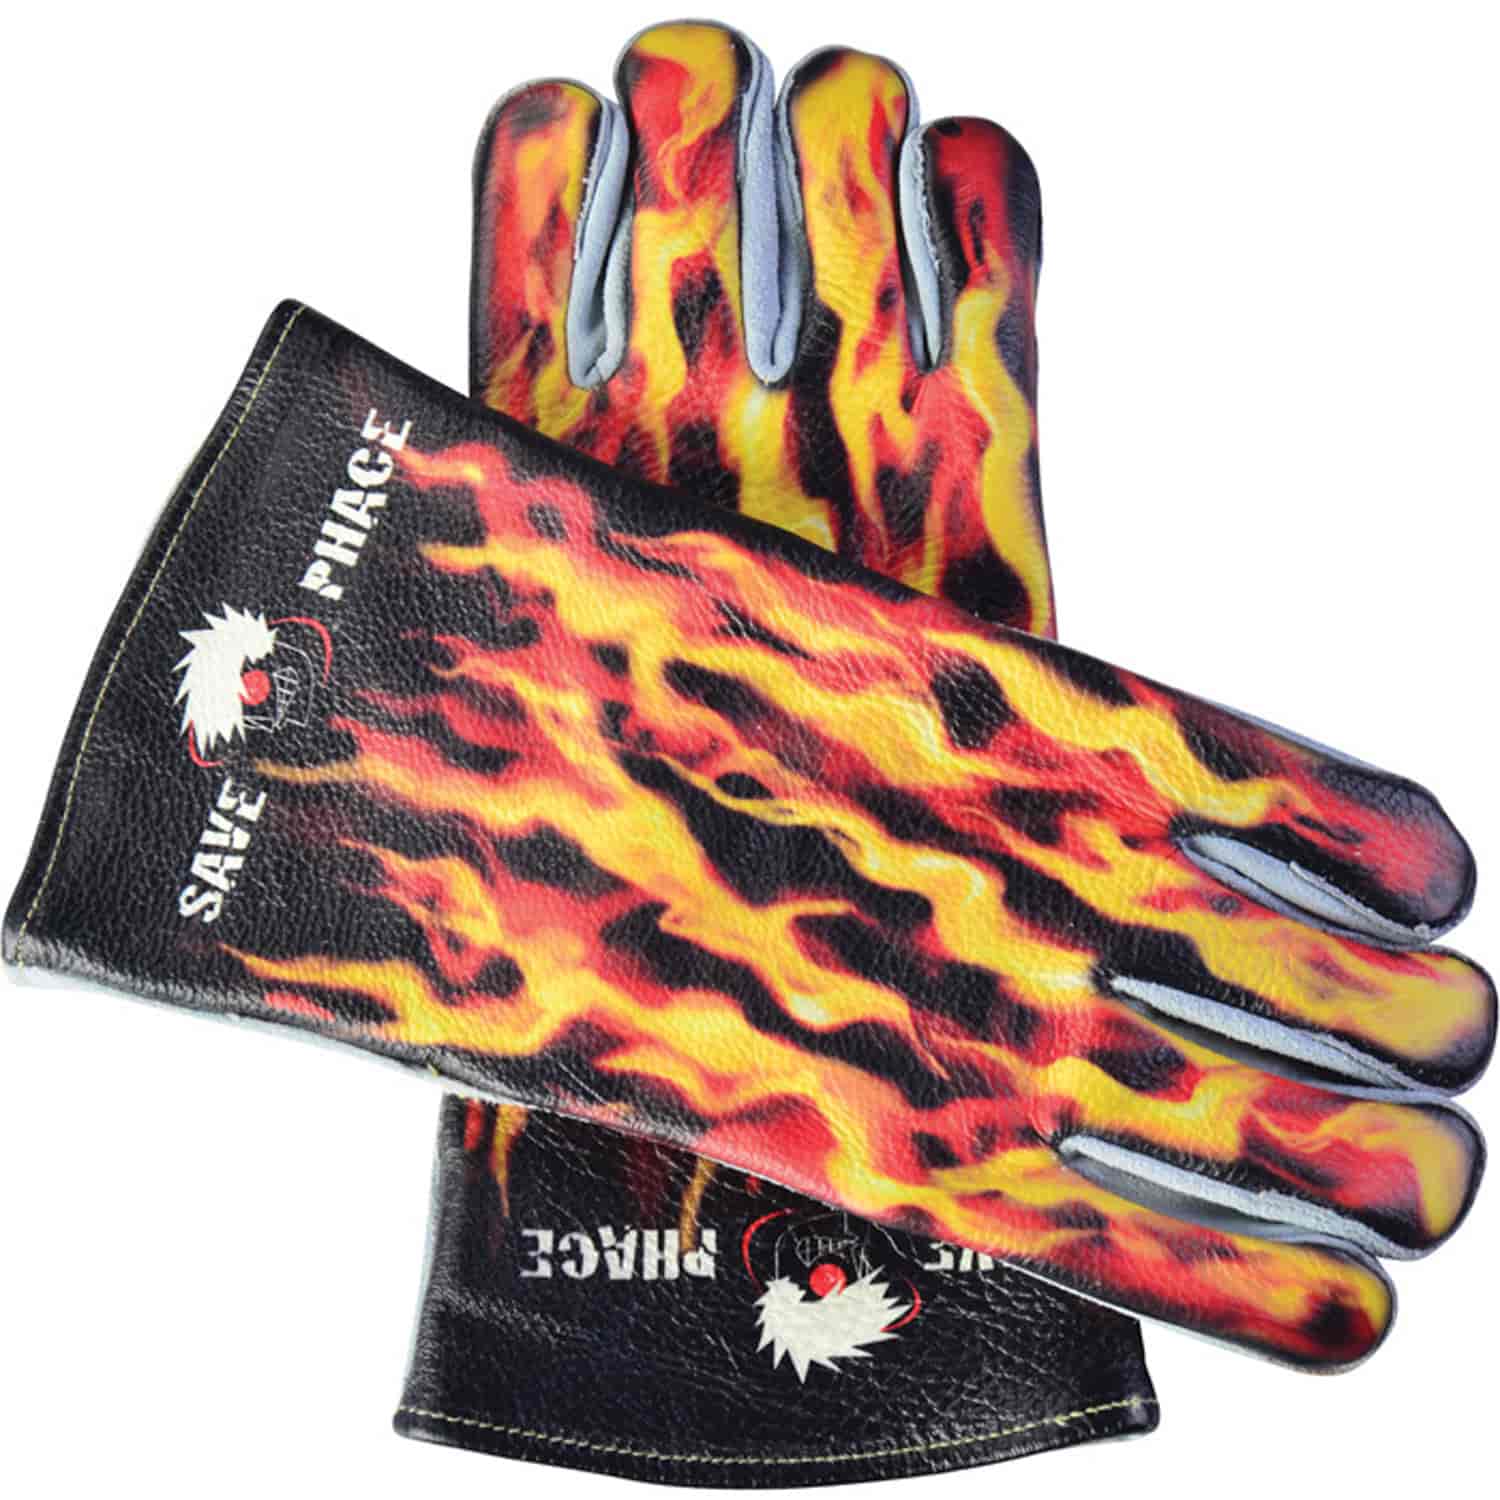 Fired Up Welding Gloves Large/X-Large